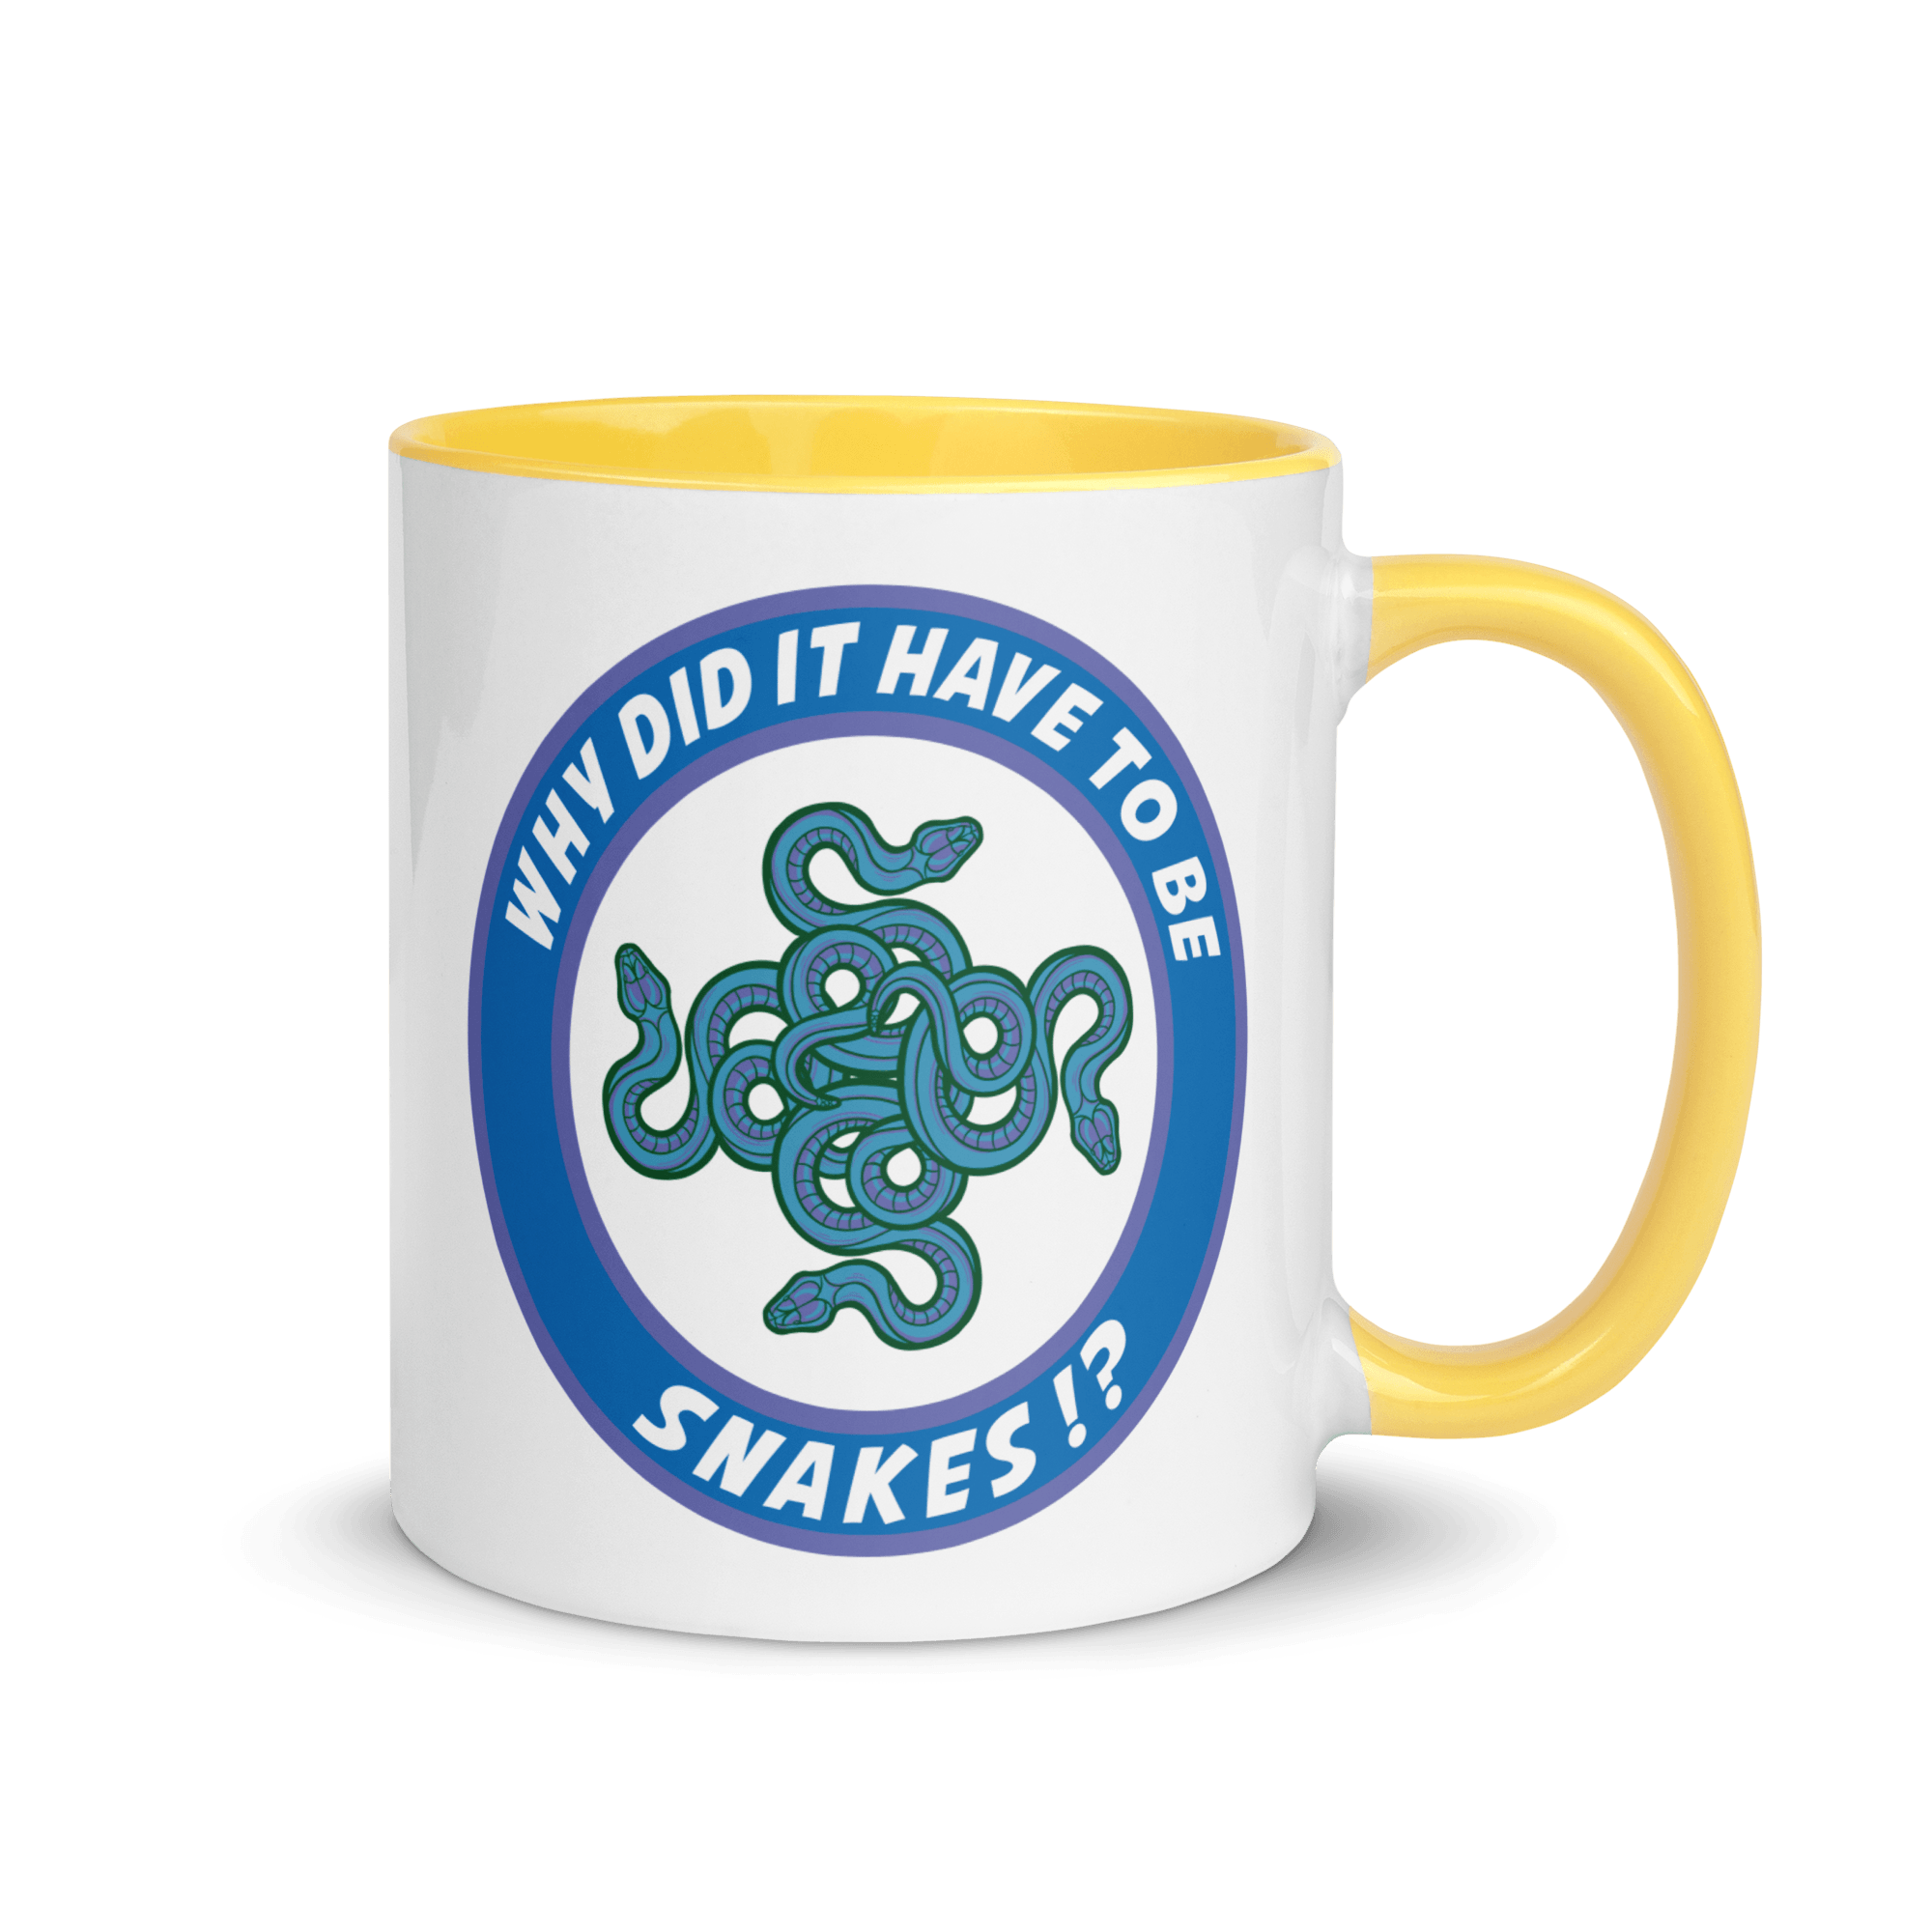 Why Did It Have To Be Snakes? Mug with Color Inside